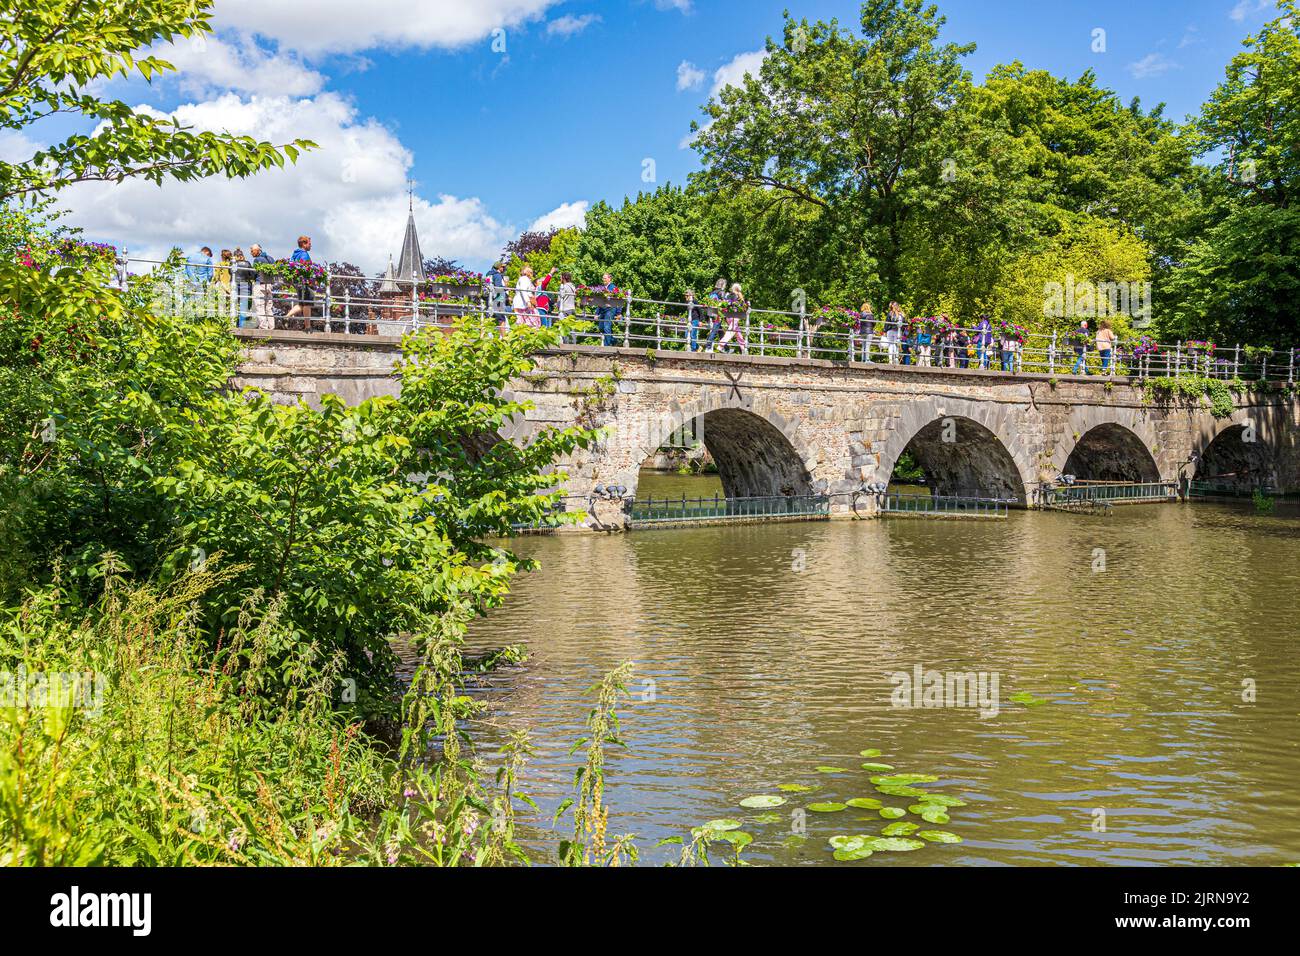 Tourists crossing the Minnewaterbrug (Lovers Bridge) over the Minnewater (Lake of love) in Bruges, Belgium Stock Photo